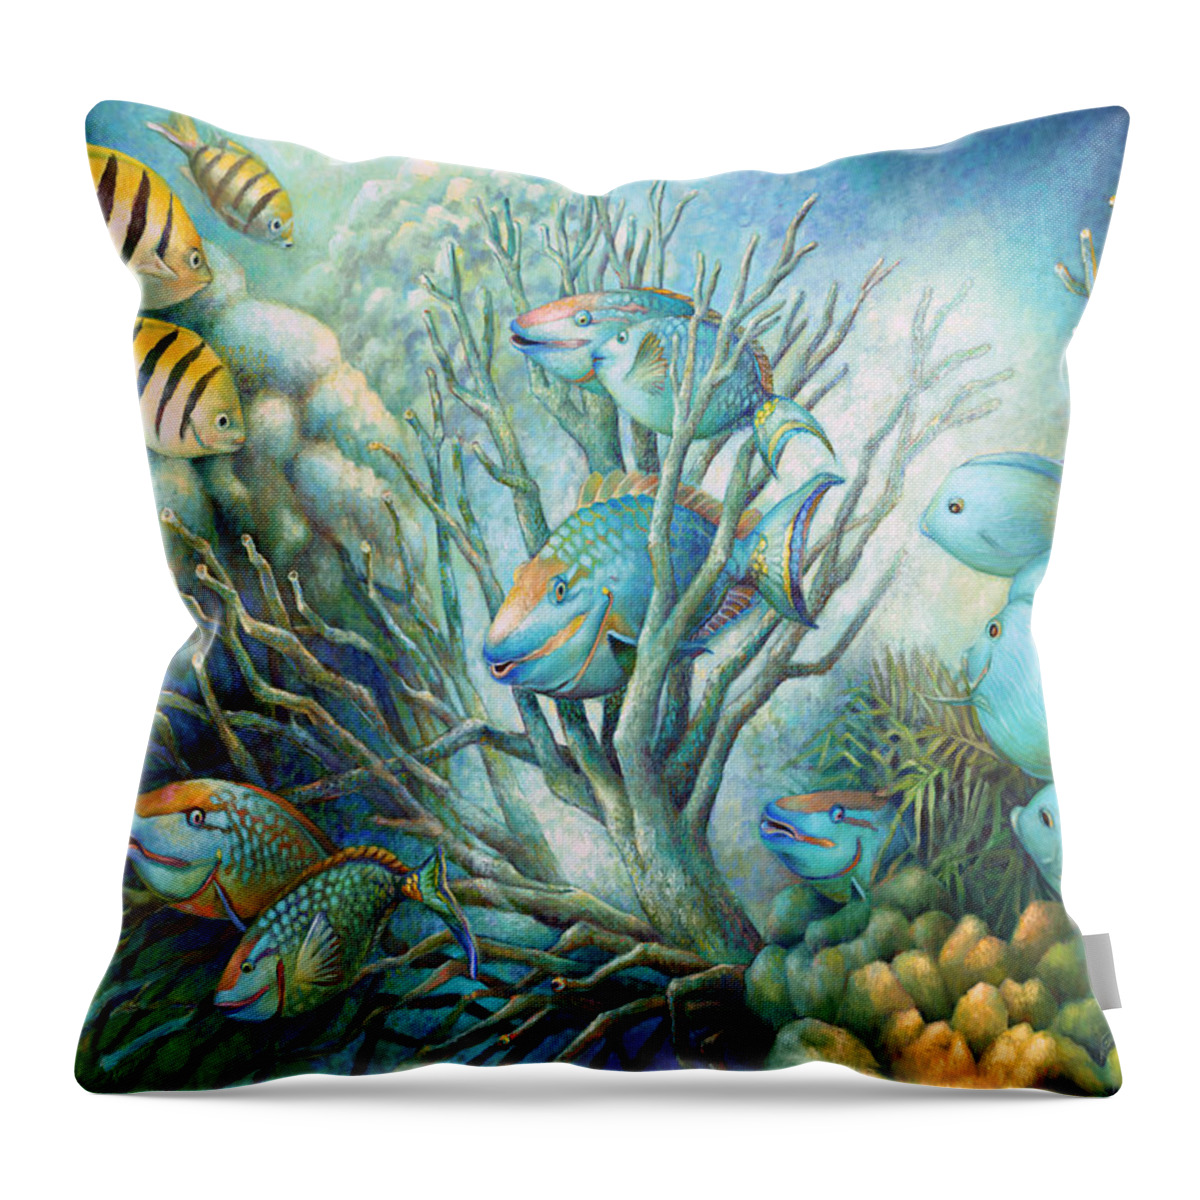 Under Water Throw Pillow featuring the painting Sea Folk by Nancy Tilles